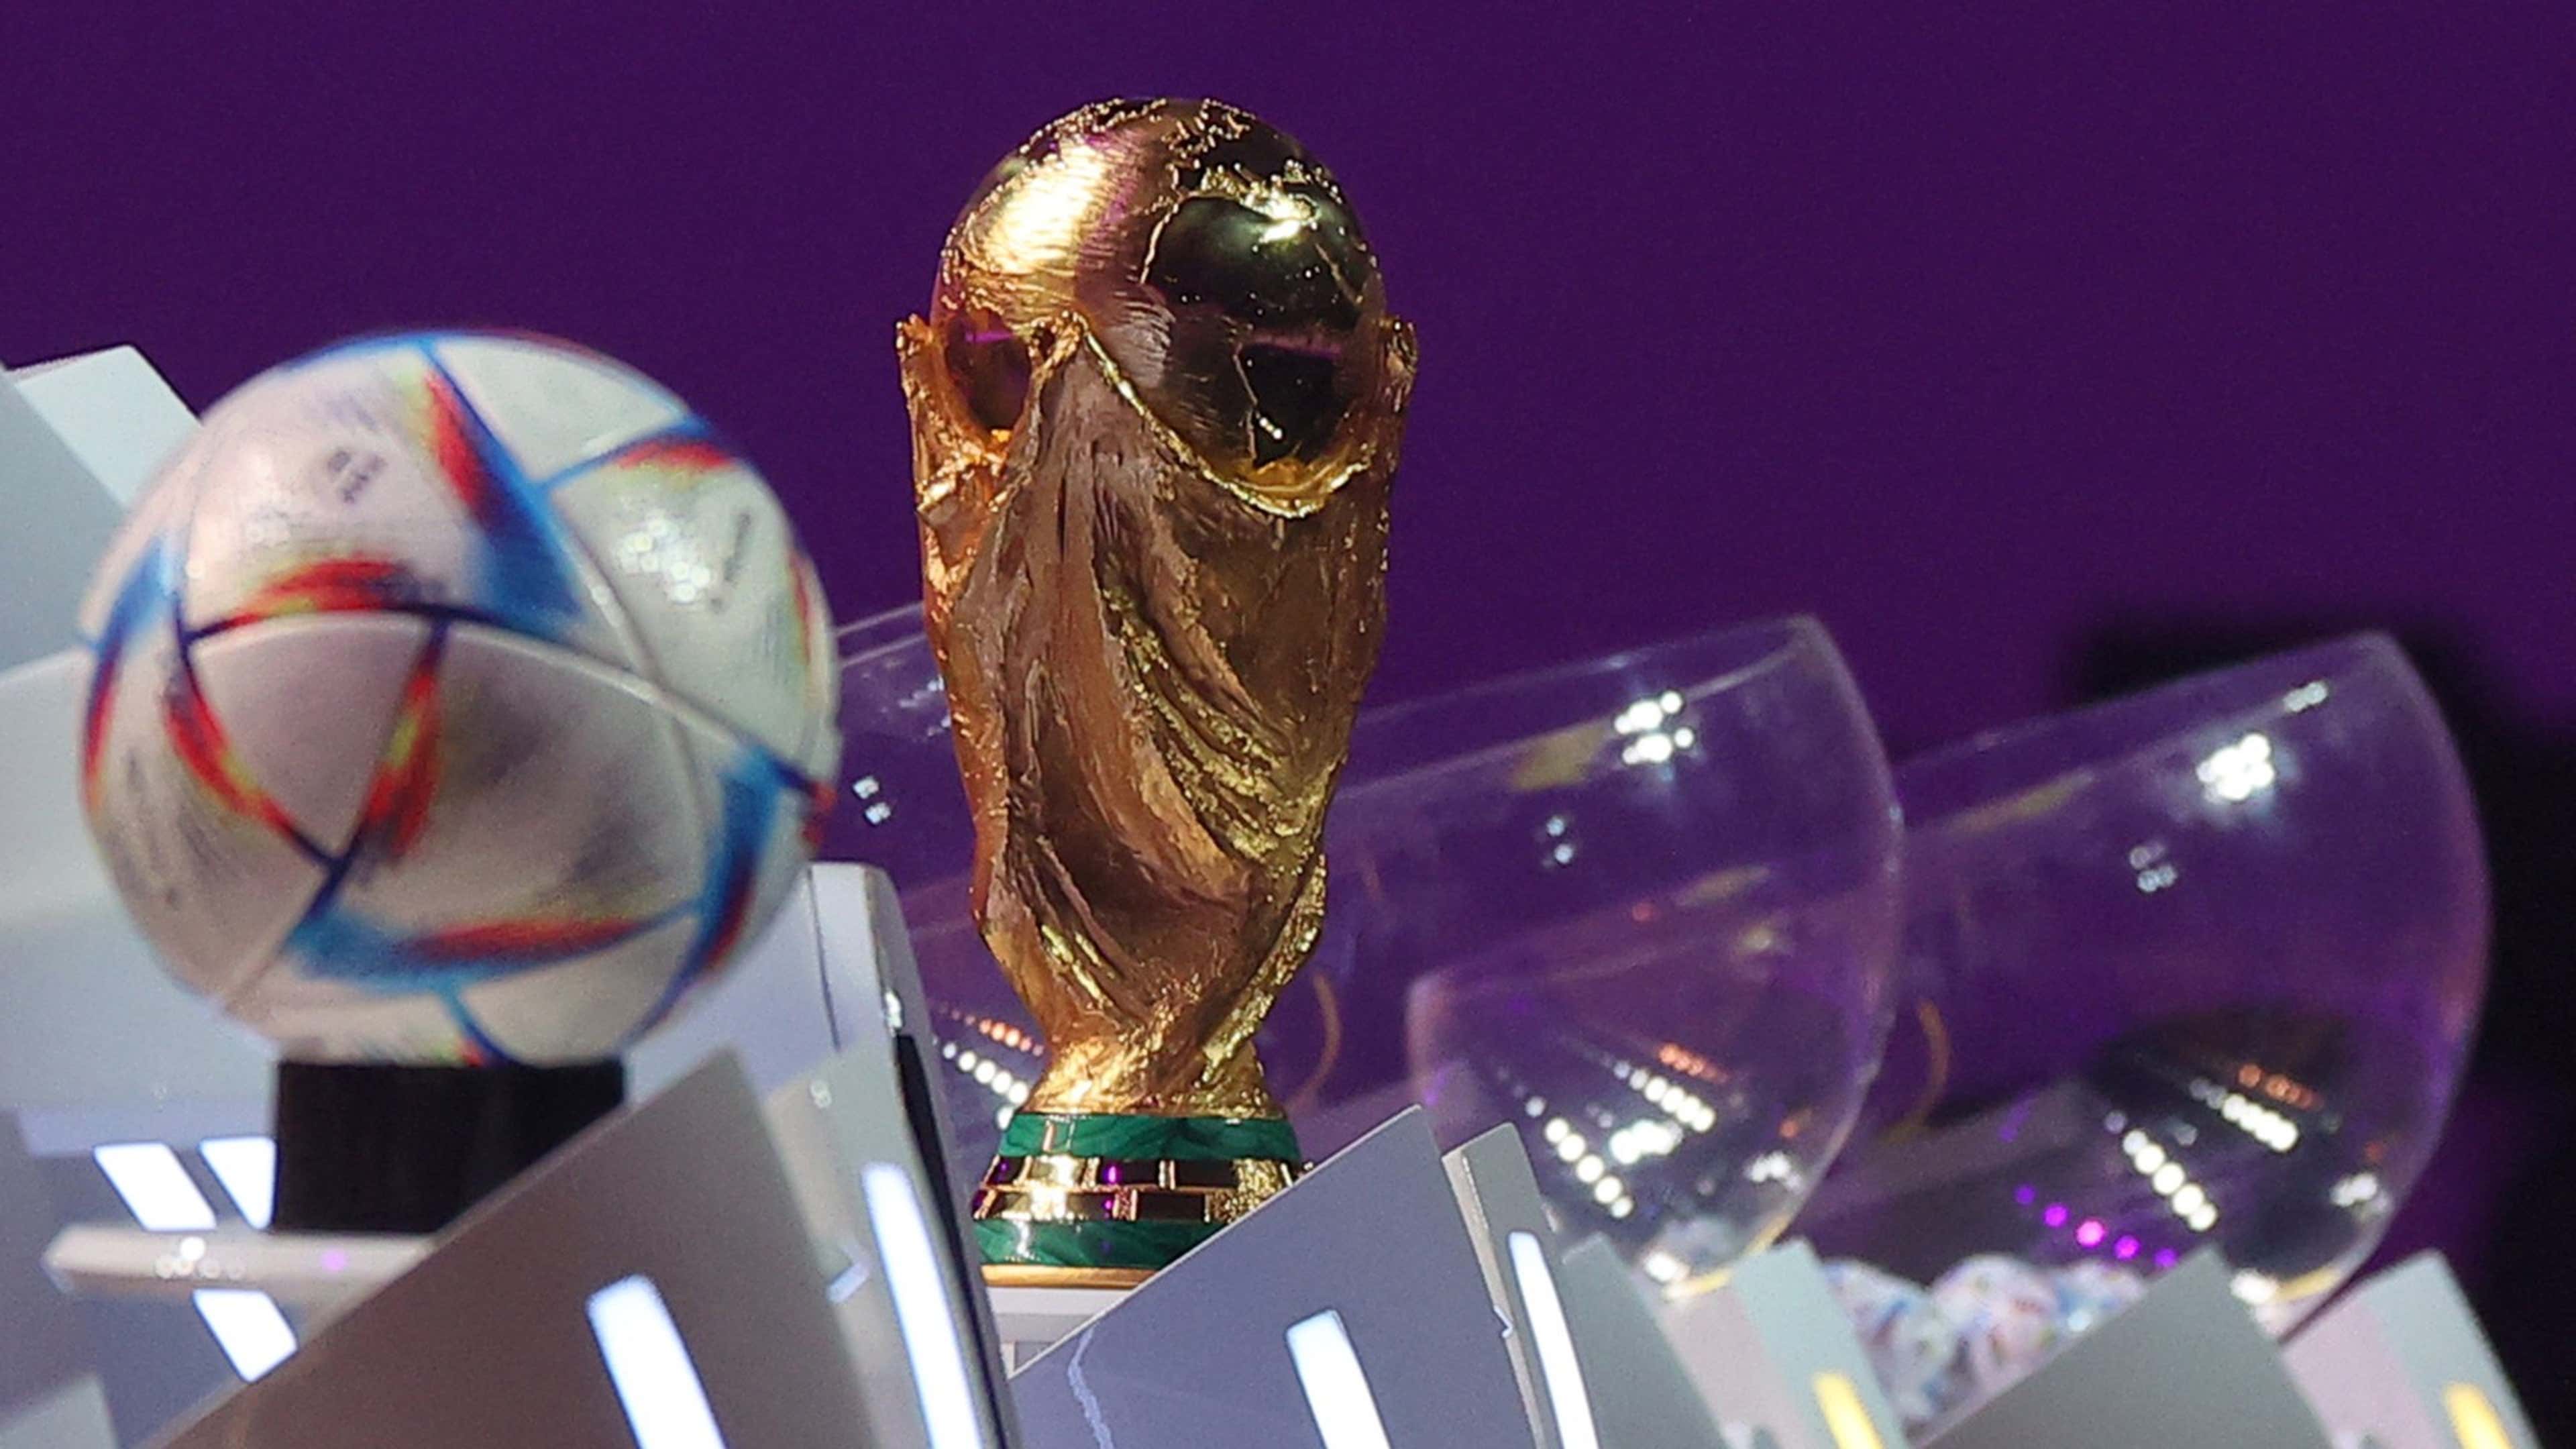 FIFA World Cup 2022 Points Table Updated Live: Switzerland, South Korea  Enter Last 16 With Wins Over Serbia and Portugal